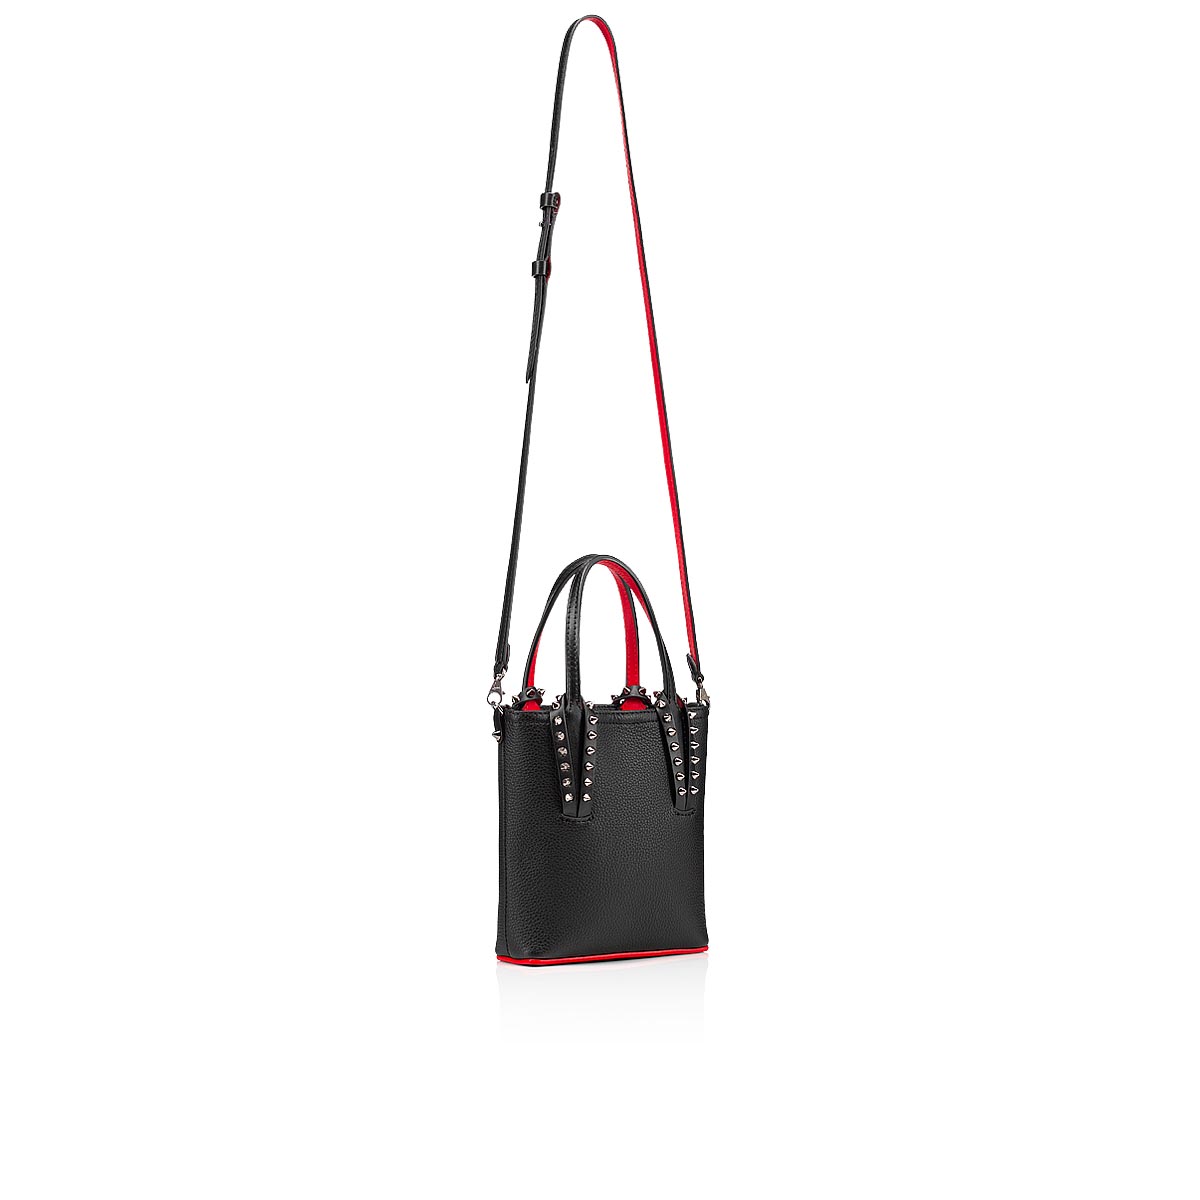 Cabata - Tote bag - Grained calf leather and spikes Couronnes Seville -  Black - Christian Louboutin